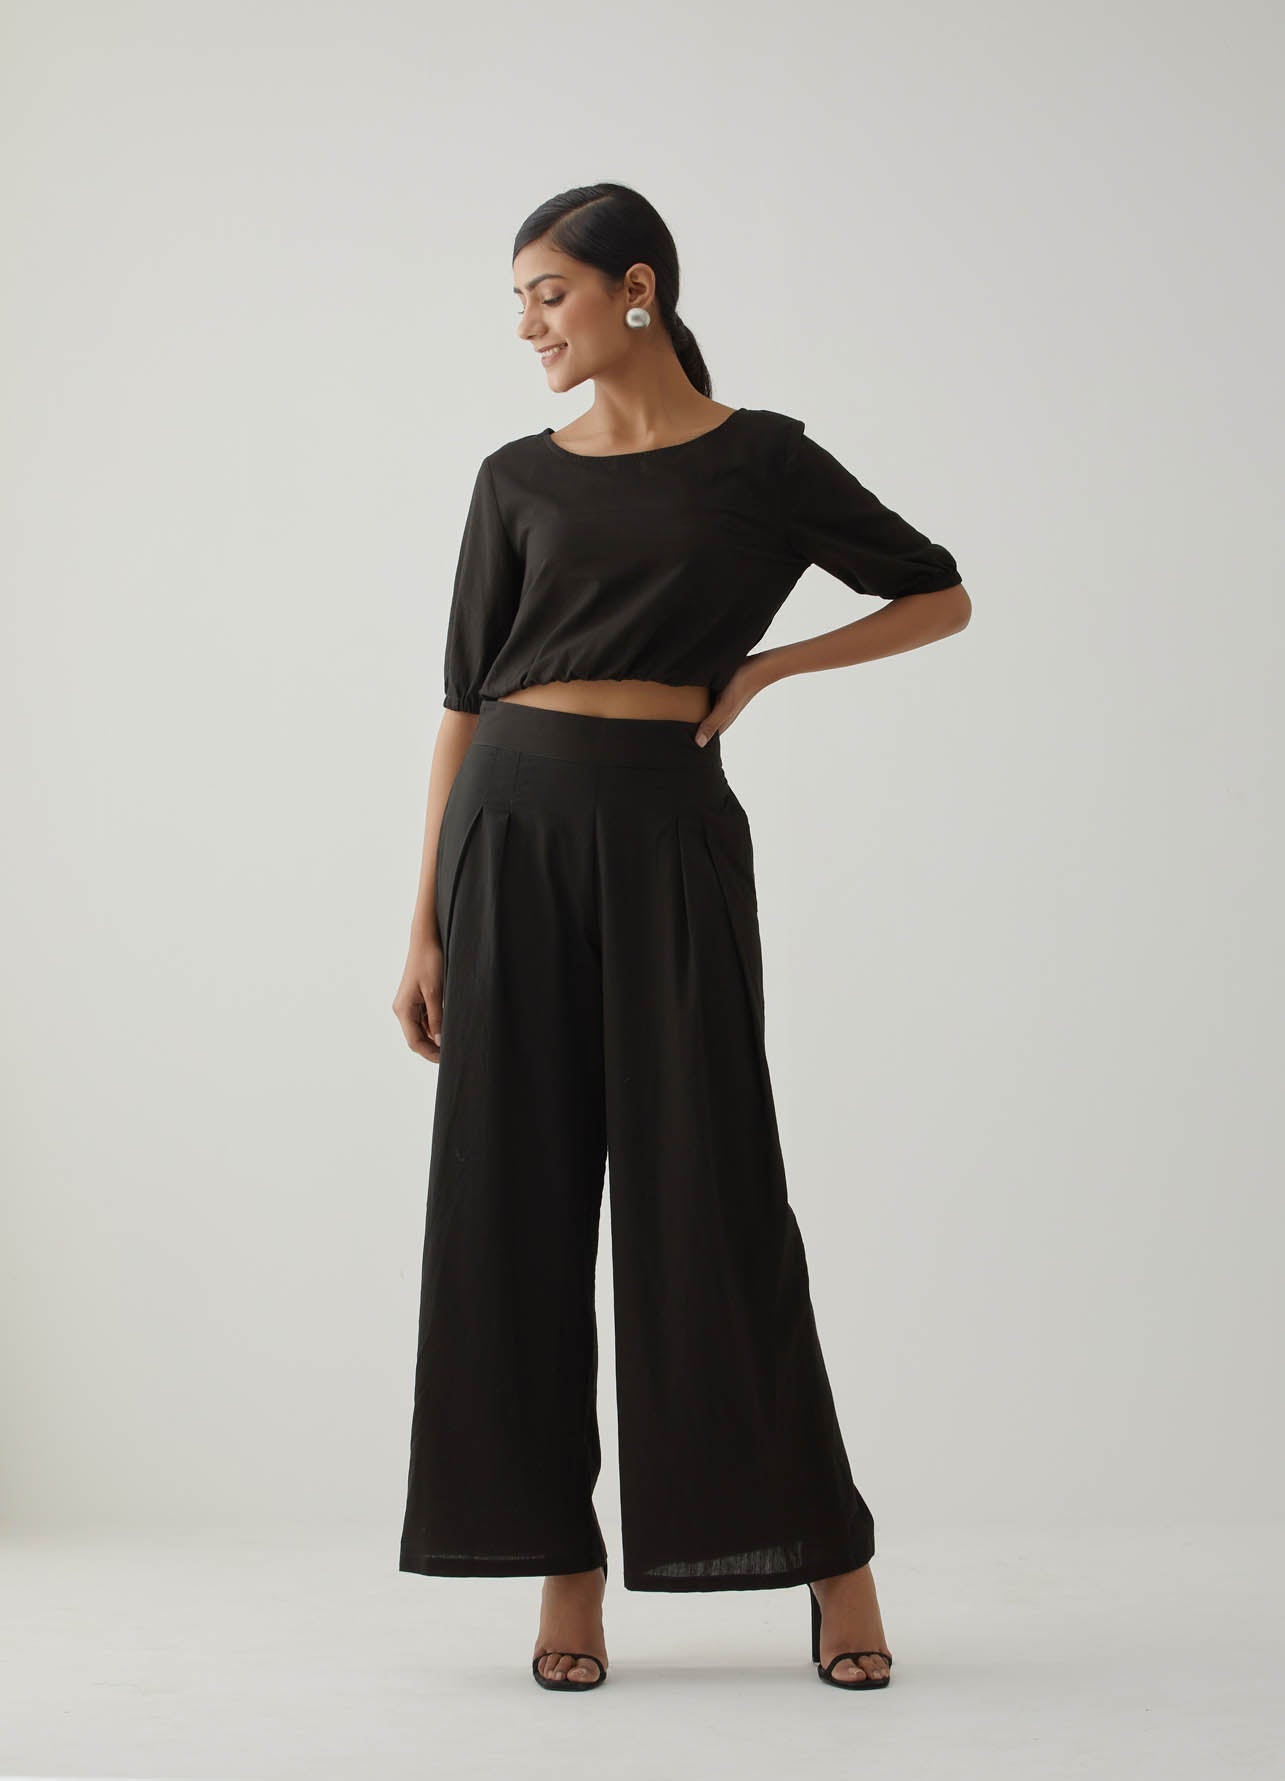 Black Crop Top Co-Ord Set - The Indian Cause